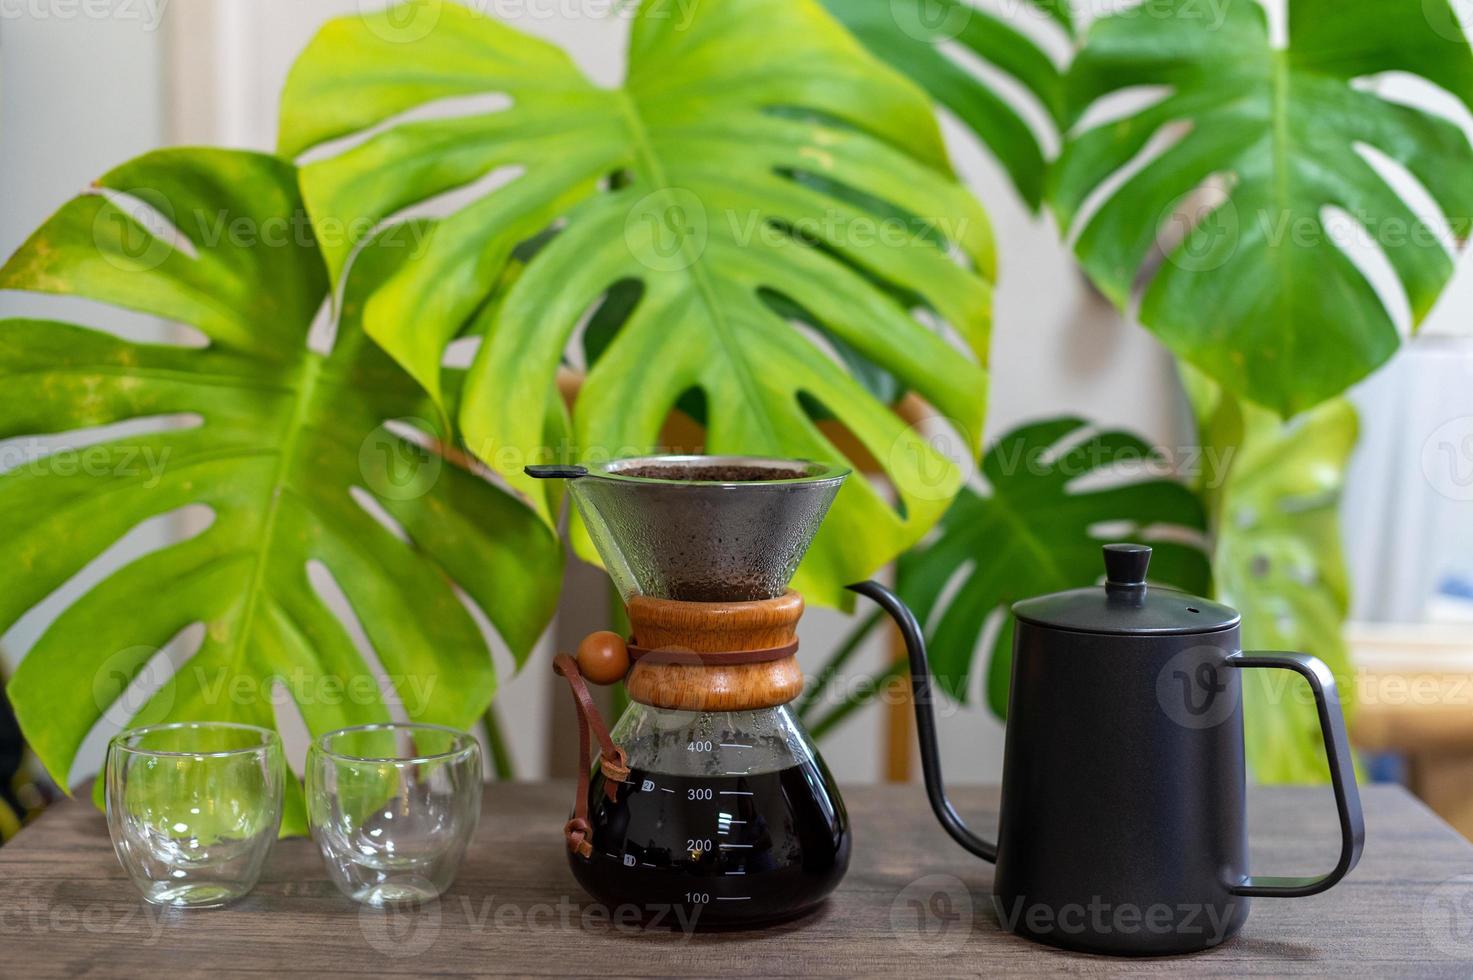 Drip coffee equipments on wooden table with monstera leaves photo